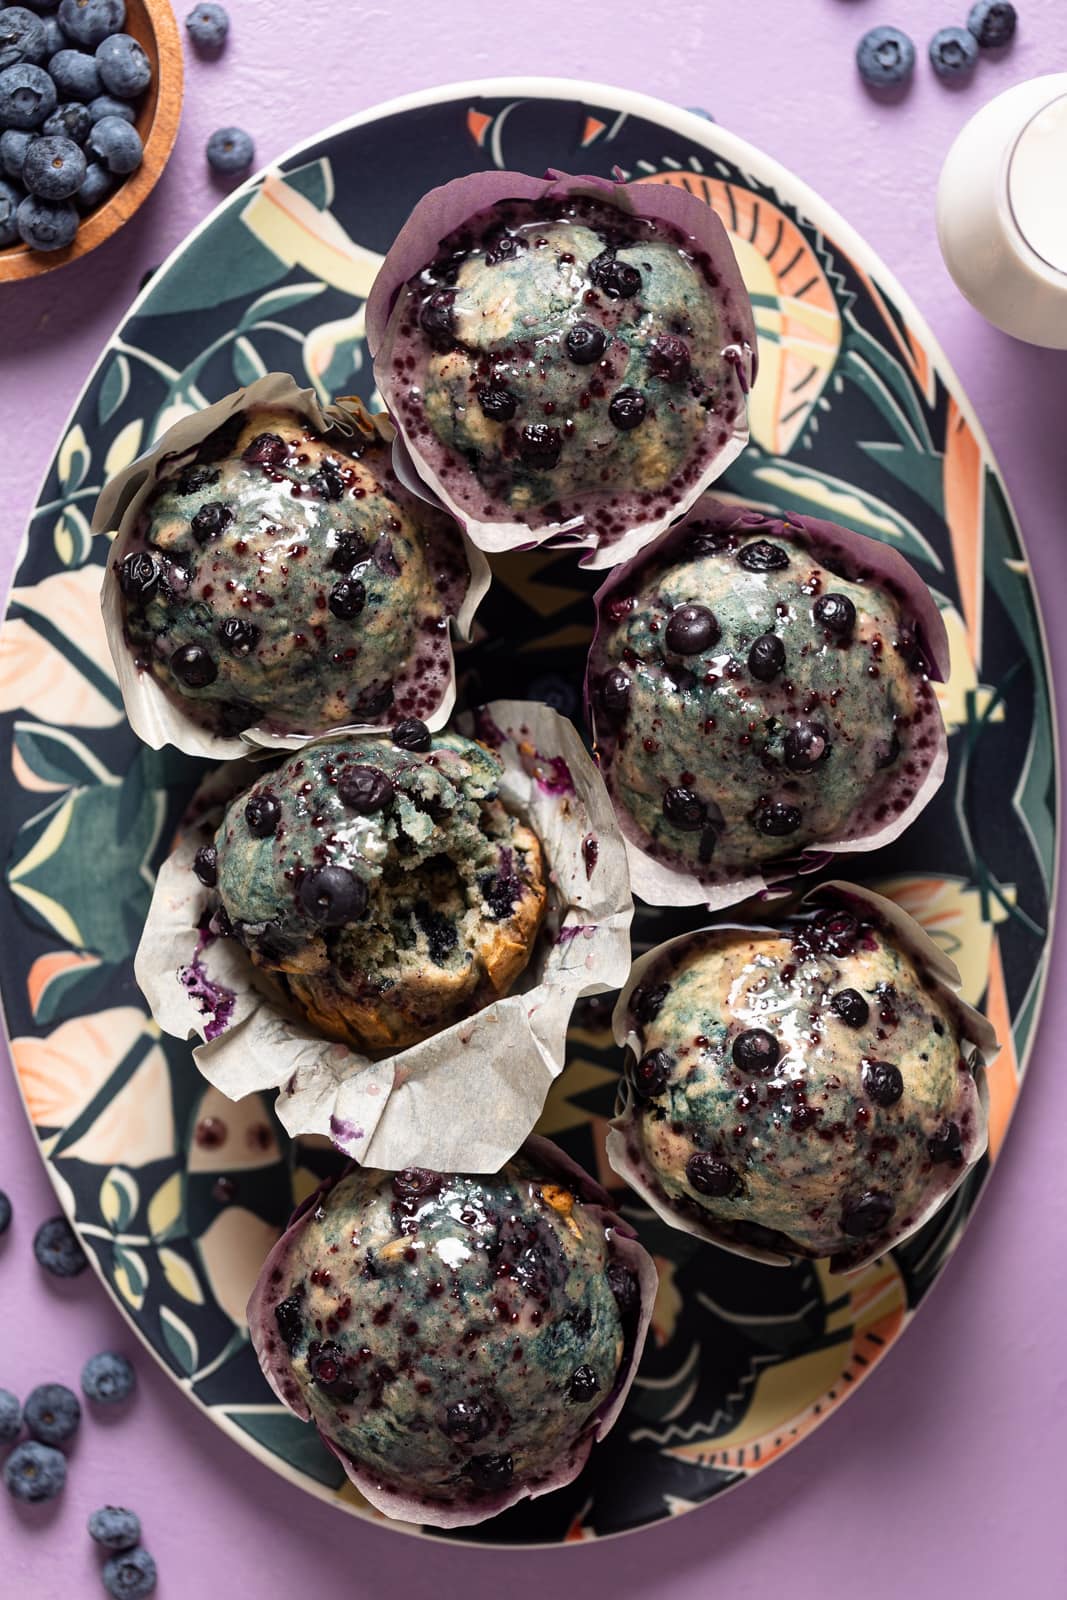 Plate of Vegan Roasted Blueberry Muffins